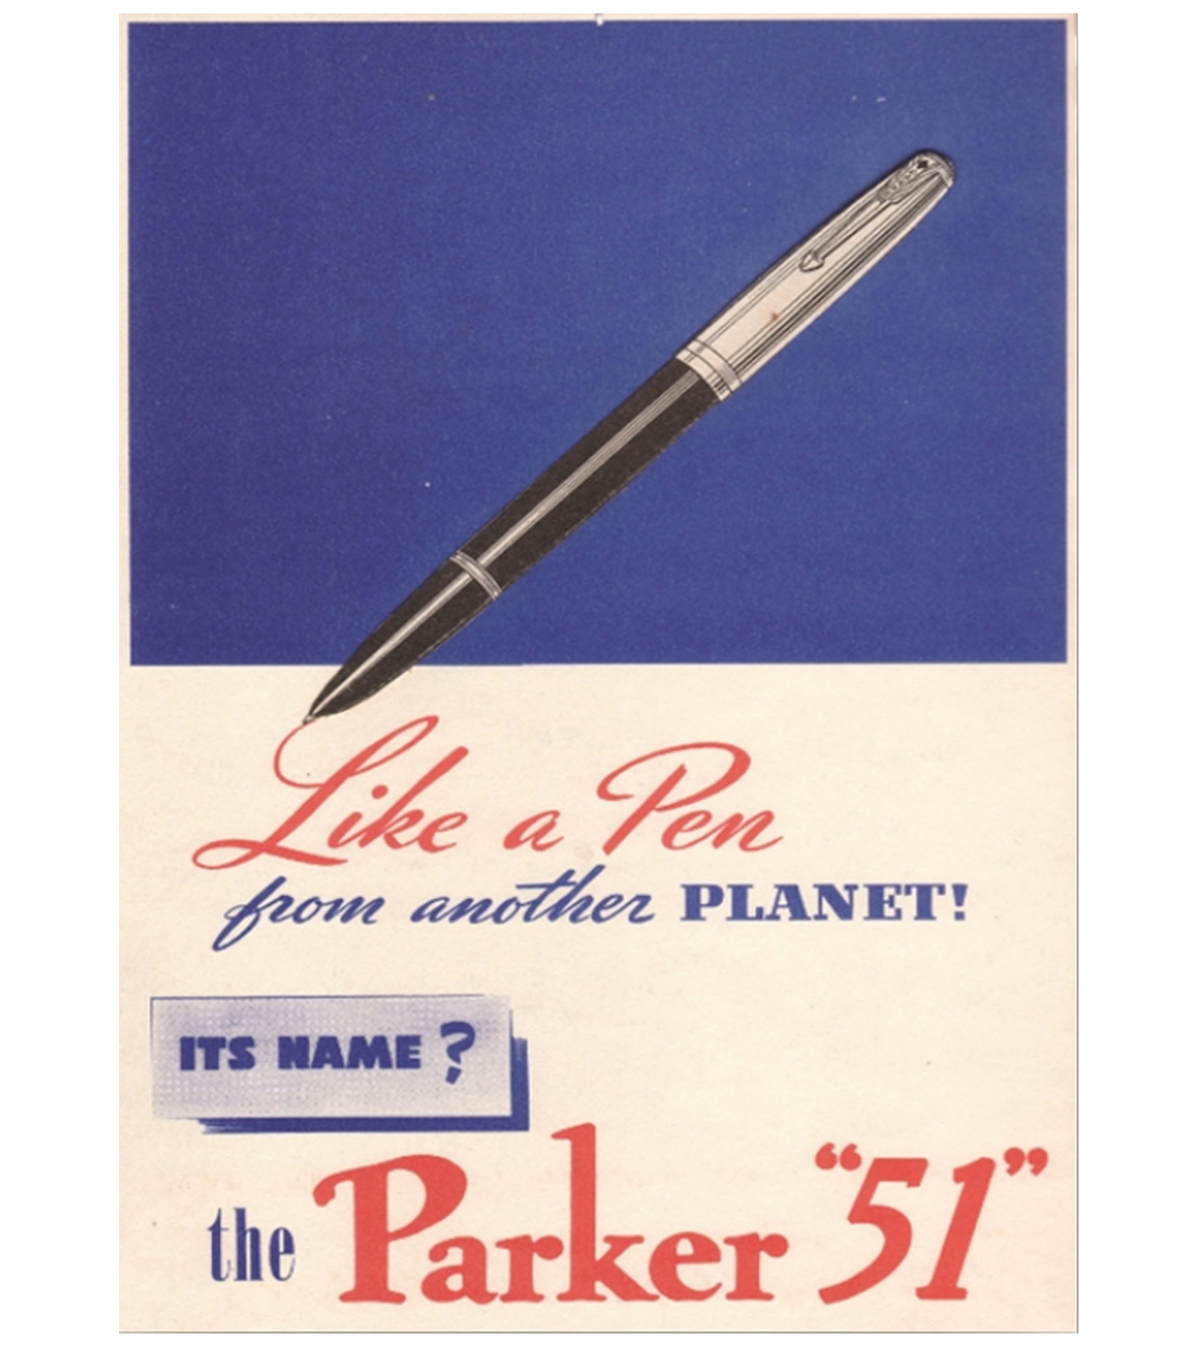 A vintage advertisement for Parker 51 pens with a headline that reads "Like a pen from another planet!"